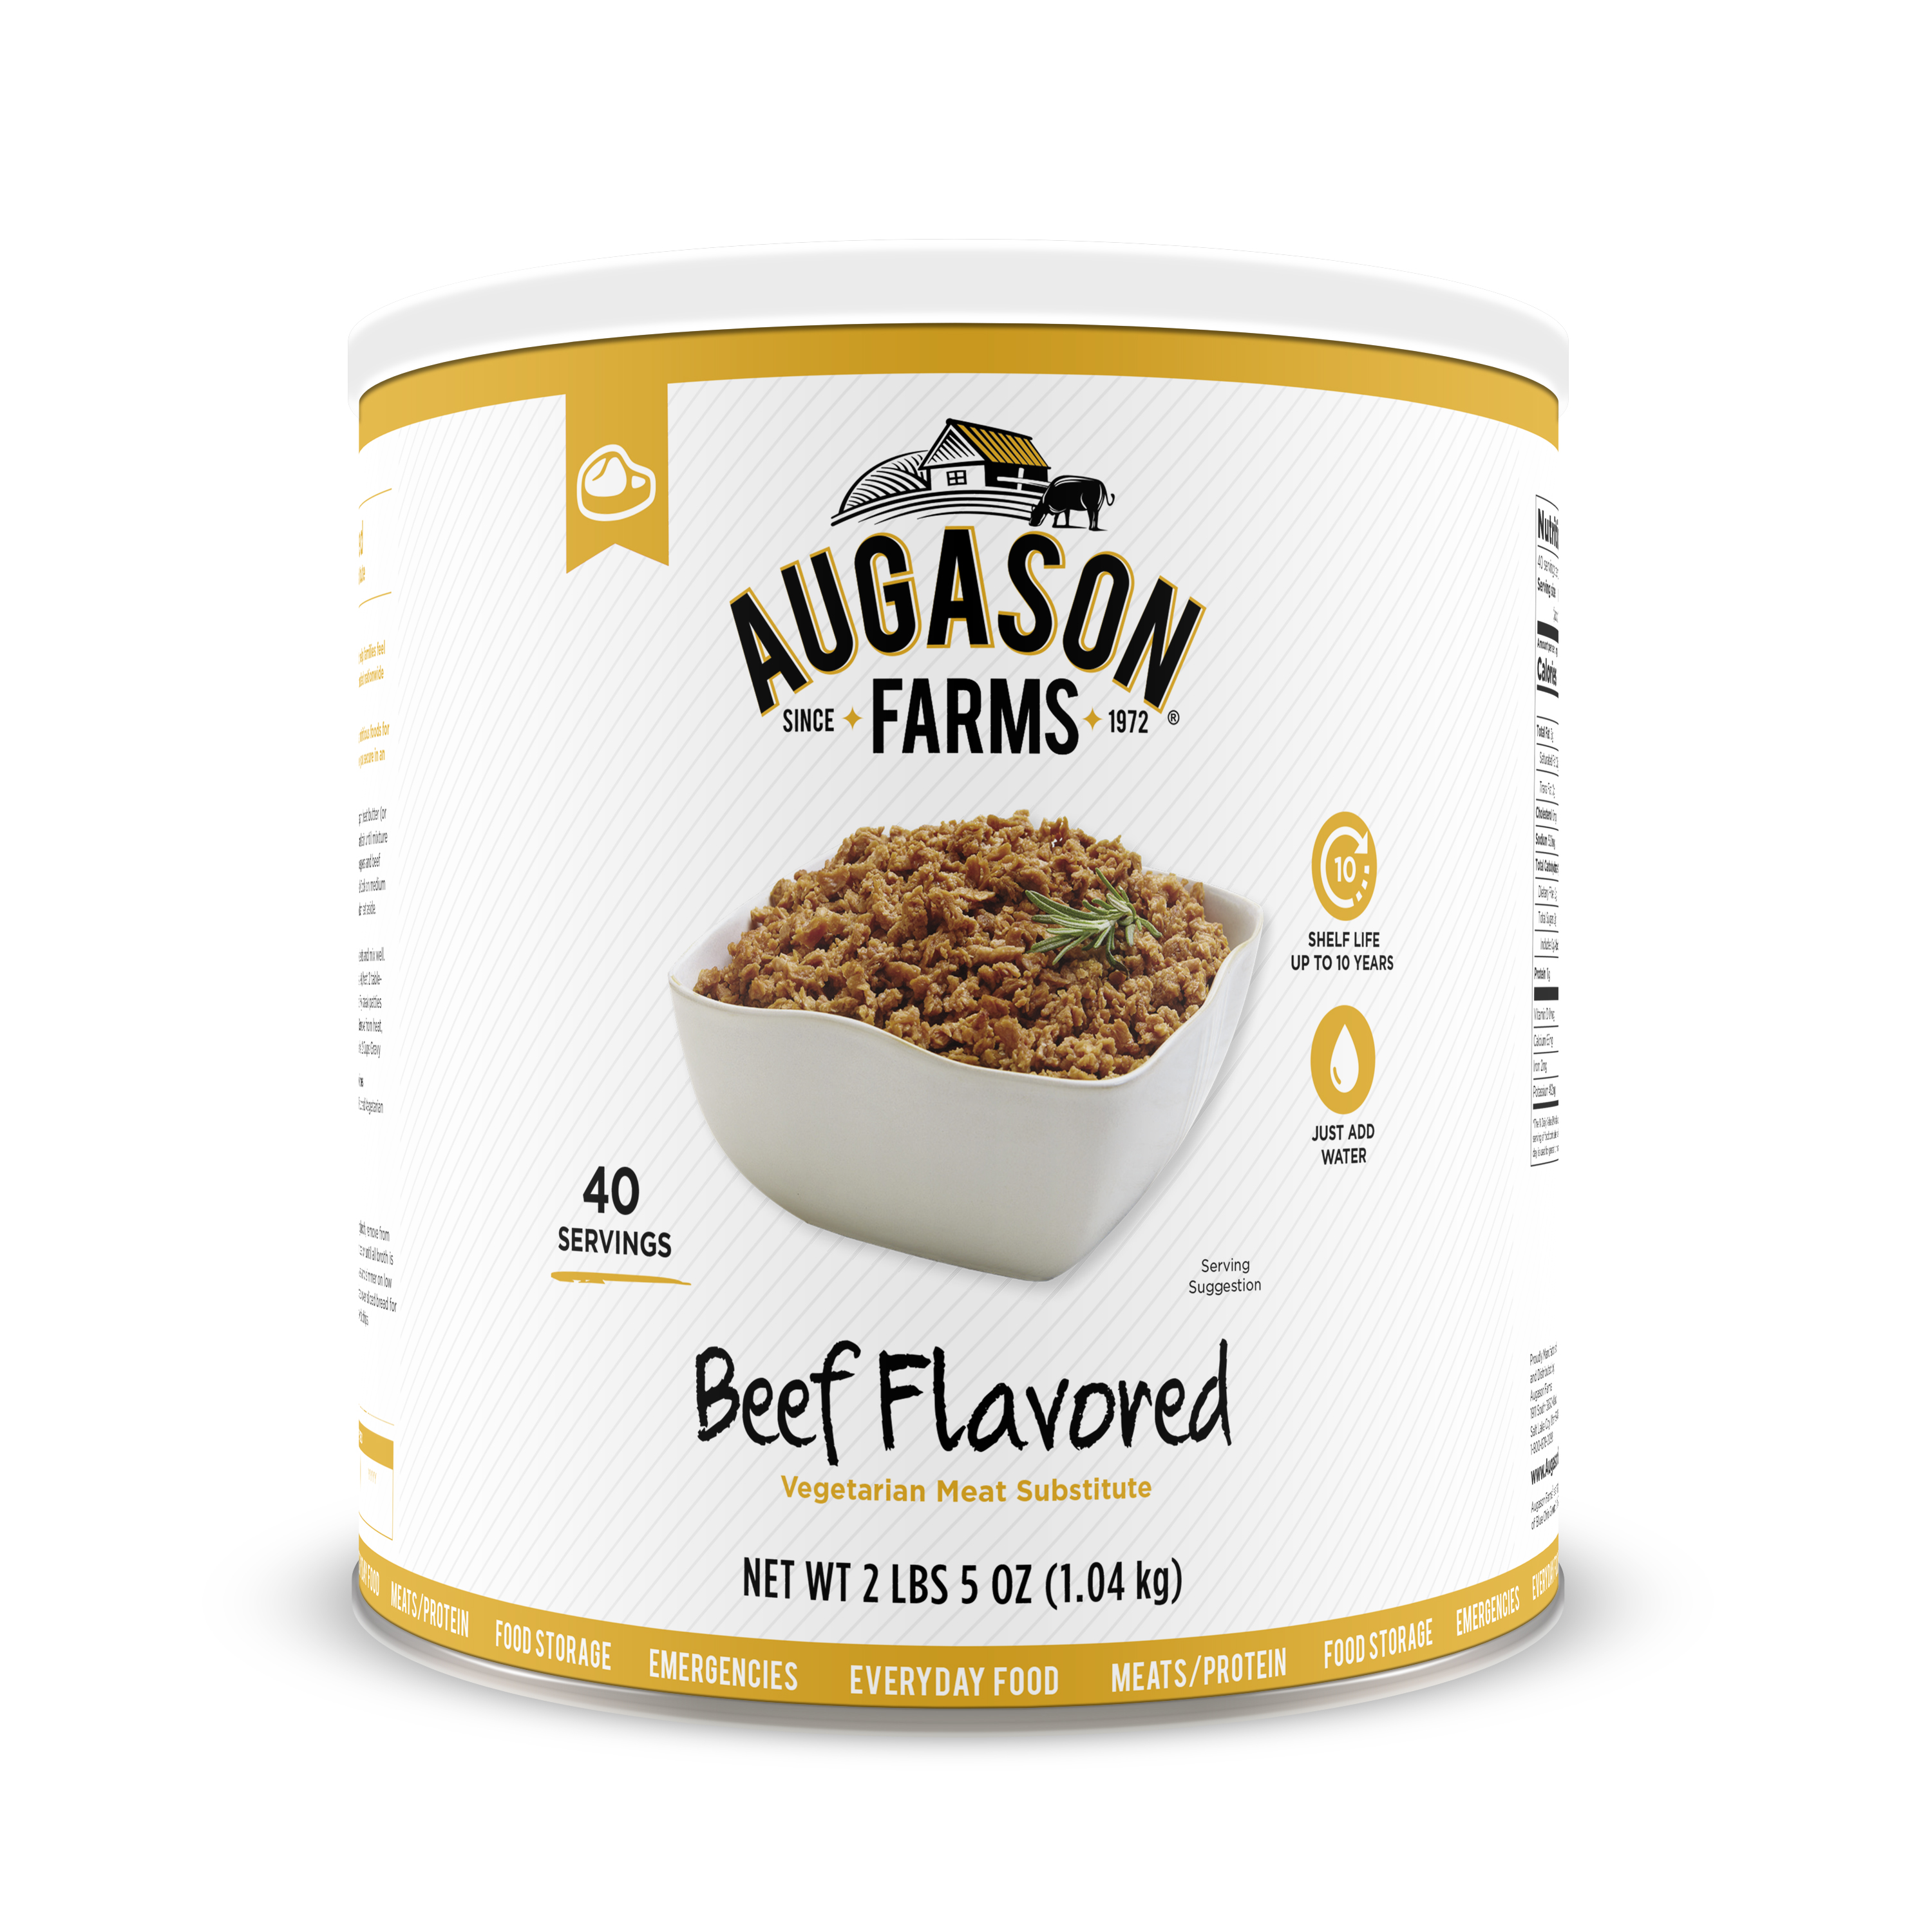 Augason Farms Beef Flavored Vegetarian Meat Substitute 2 lbs 5 oz No. 10 Can - image 1 of 7